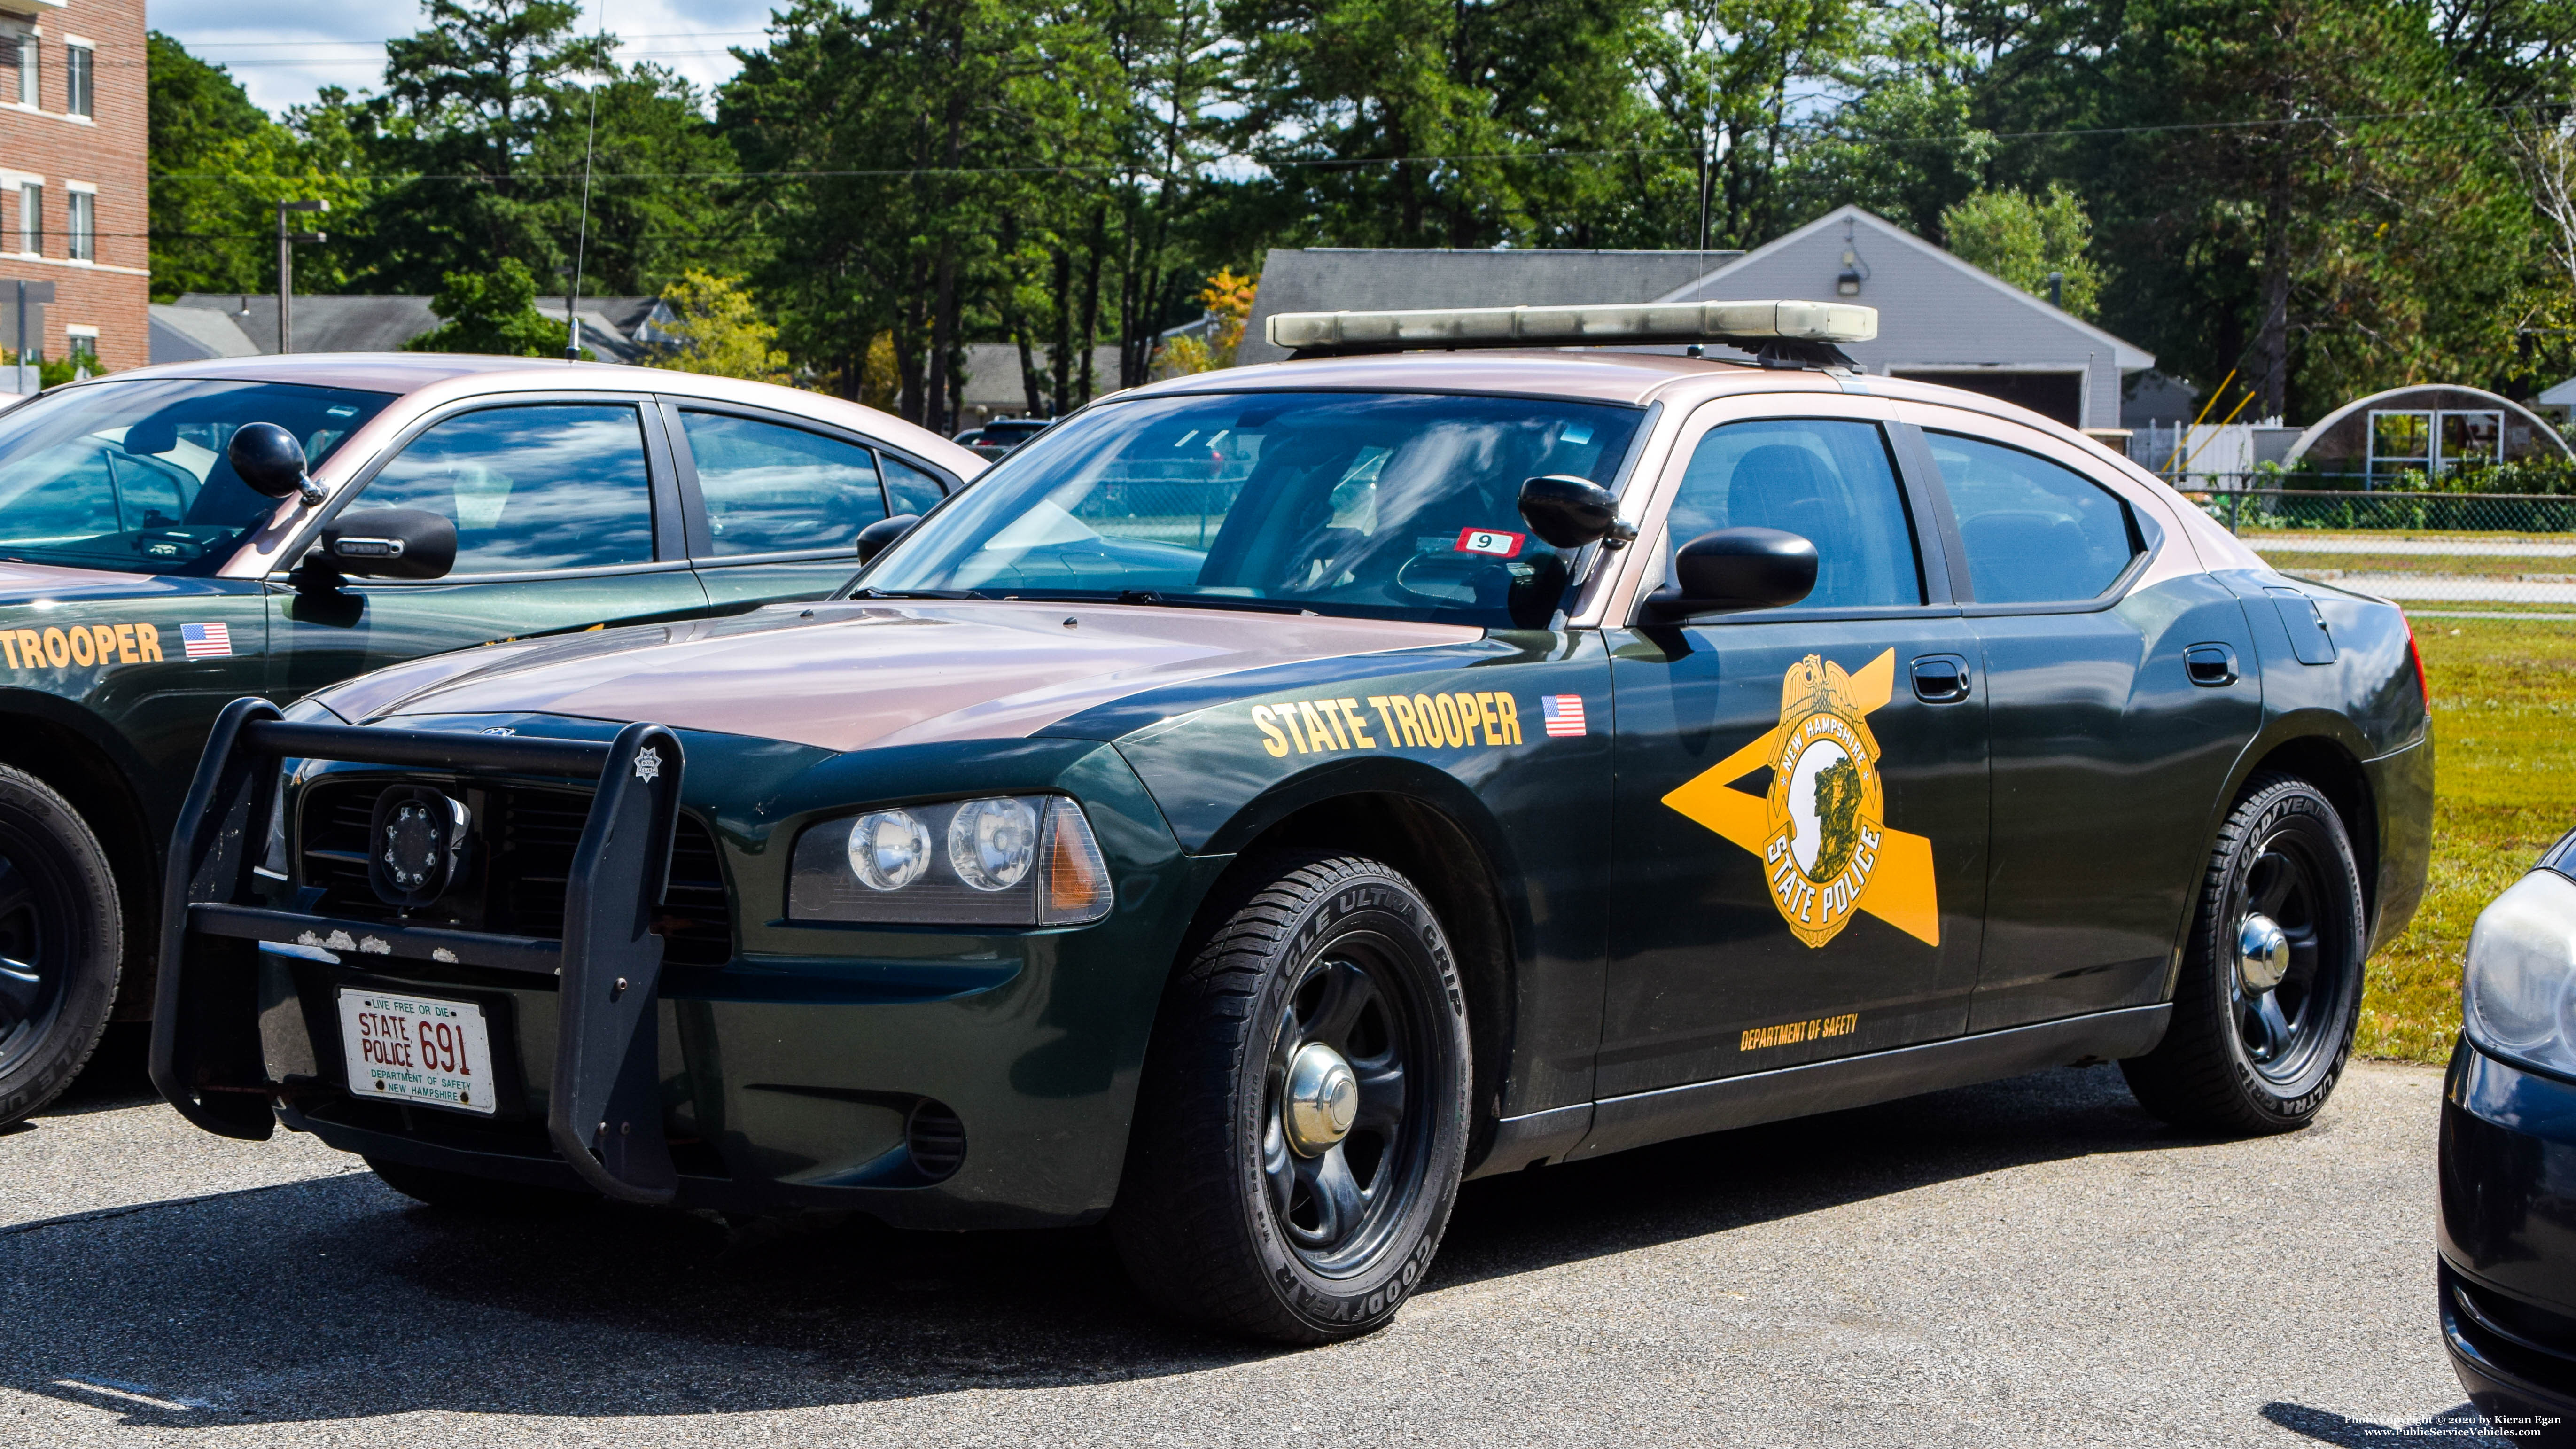 A photo  of New Hampshire State Police
            Cruiser 691, a 2006-2010 Dodge Charger             taken by Kieran Egan